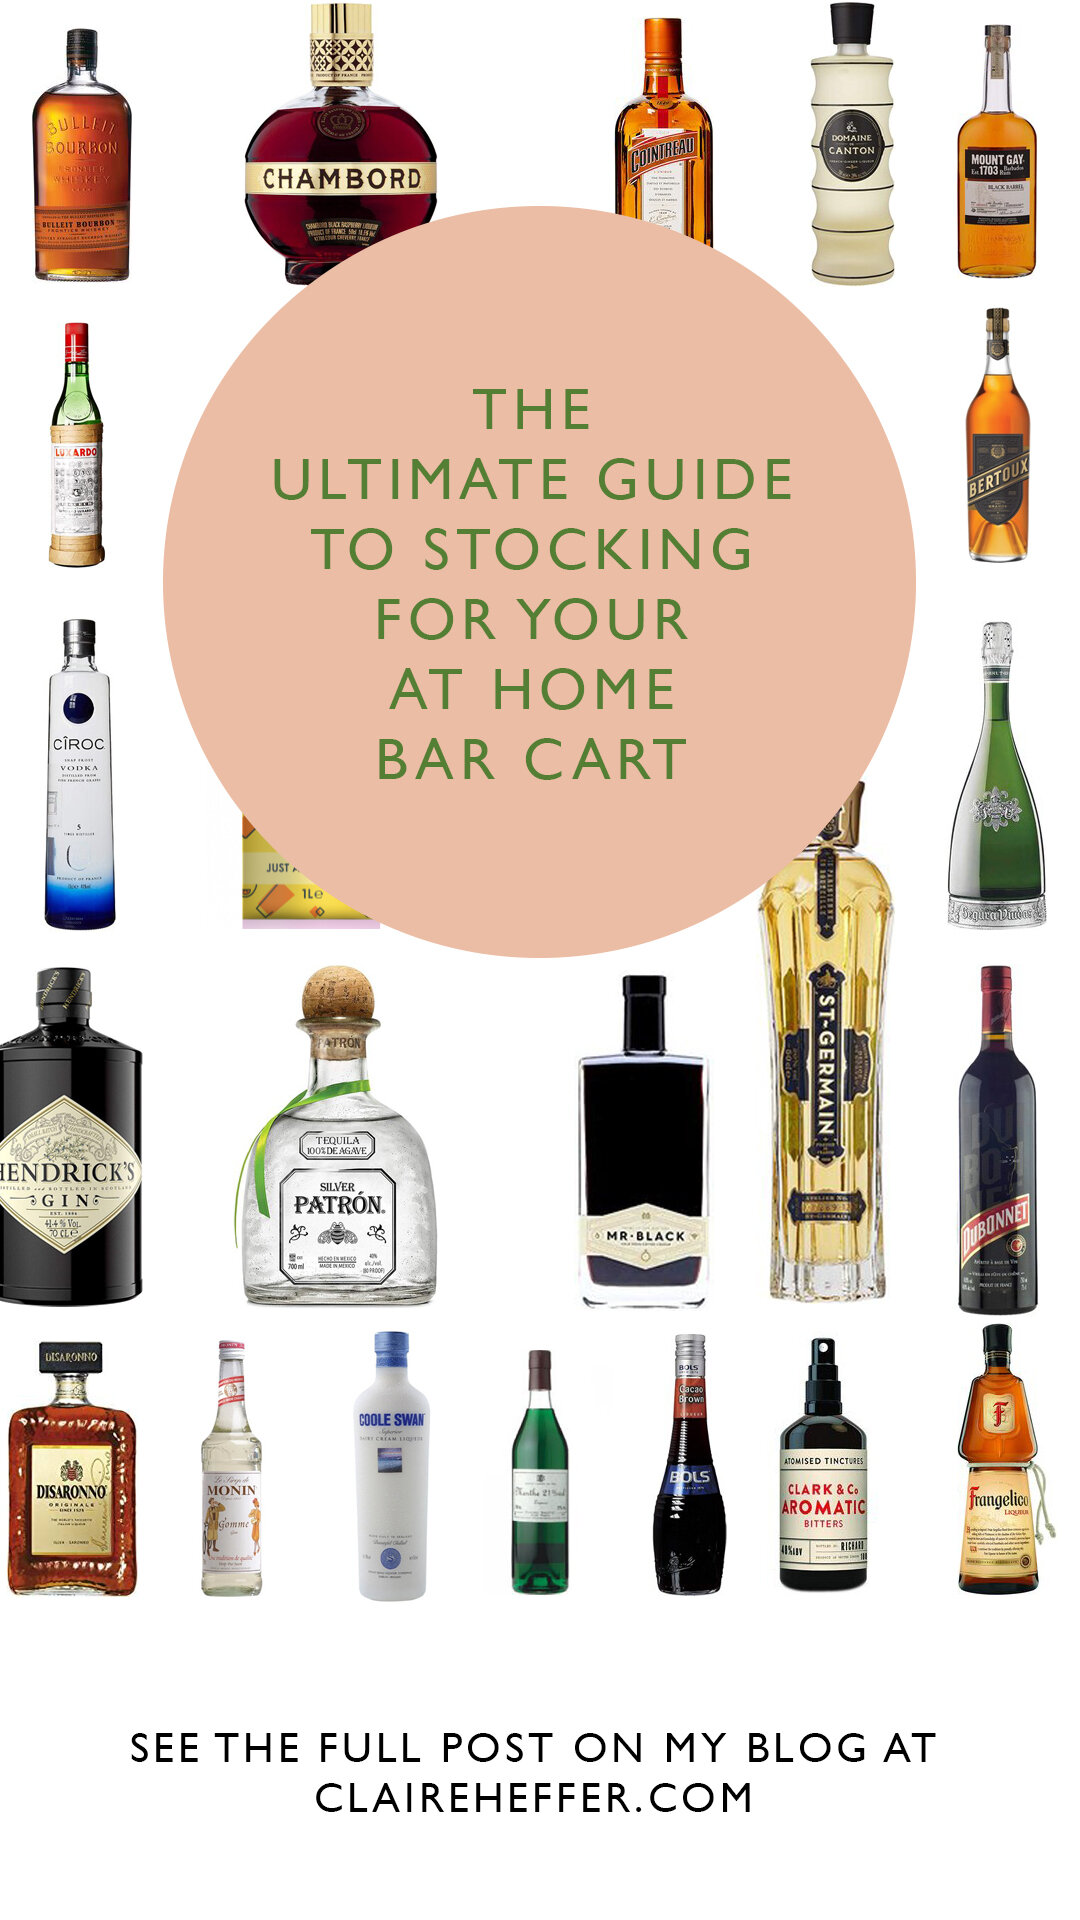 THE ULTIMATE GUIDE TO STOCKING YOUR AT HOME BAR CART.jpg